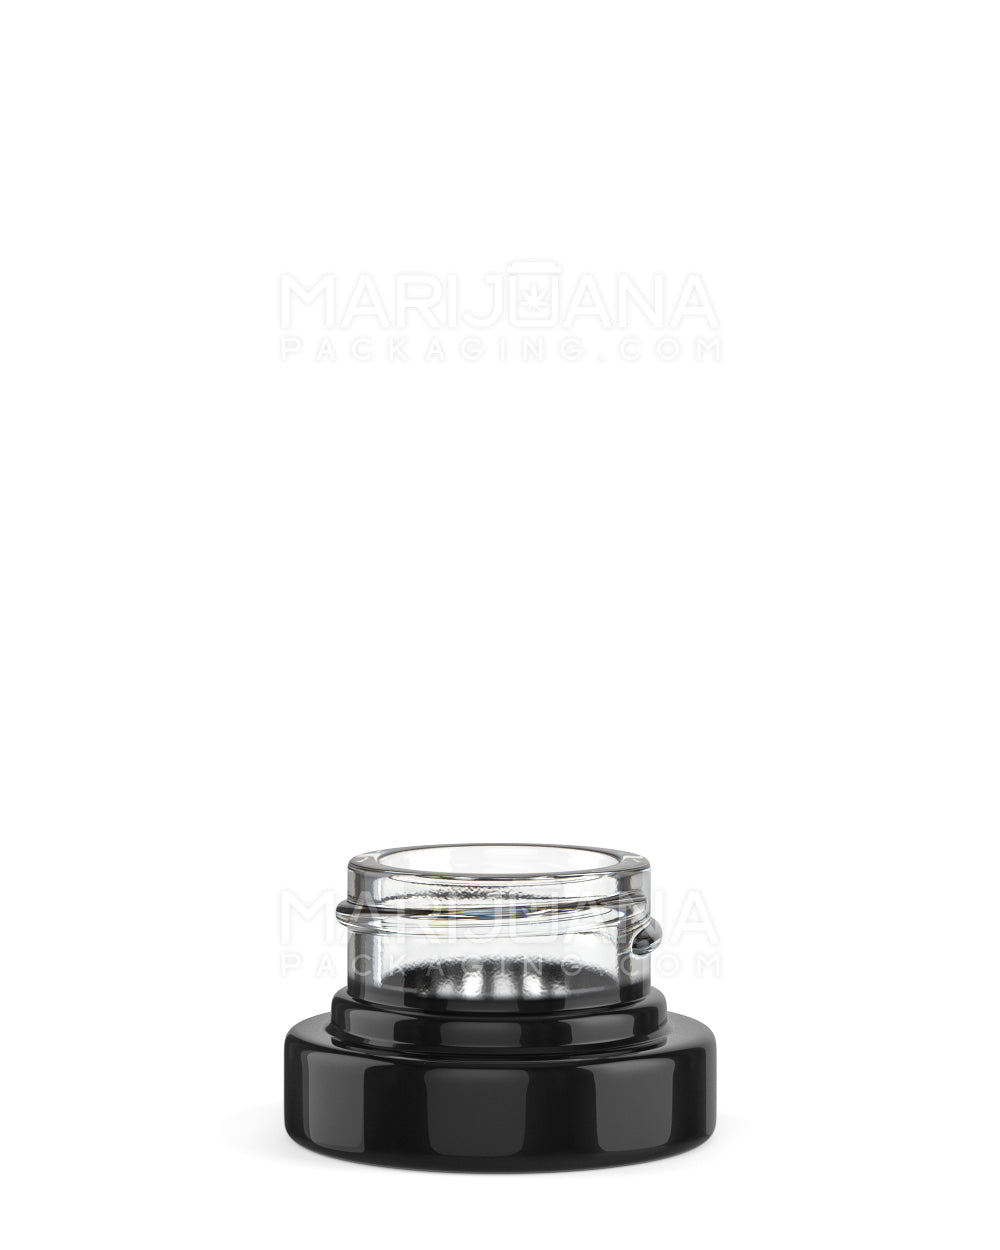 Glossy Black Glass Concentrate Containers w/ Metallized Interior | 28mm - 5mL - 400 Count - 1